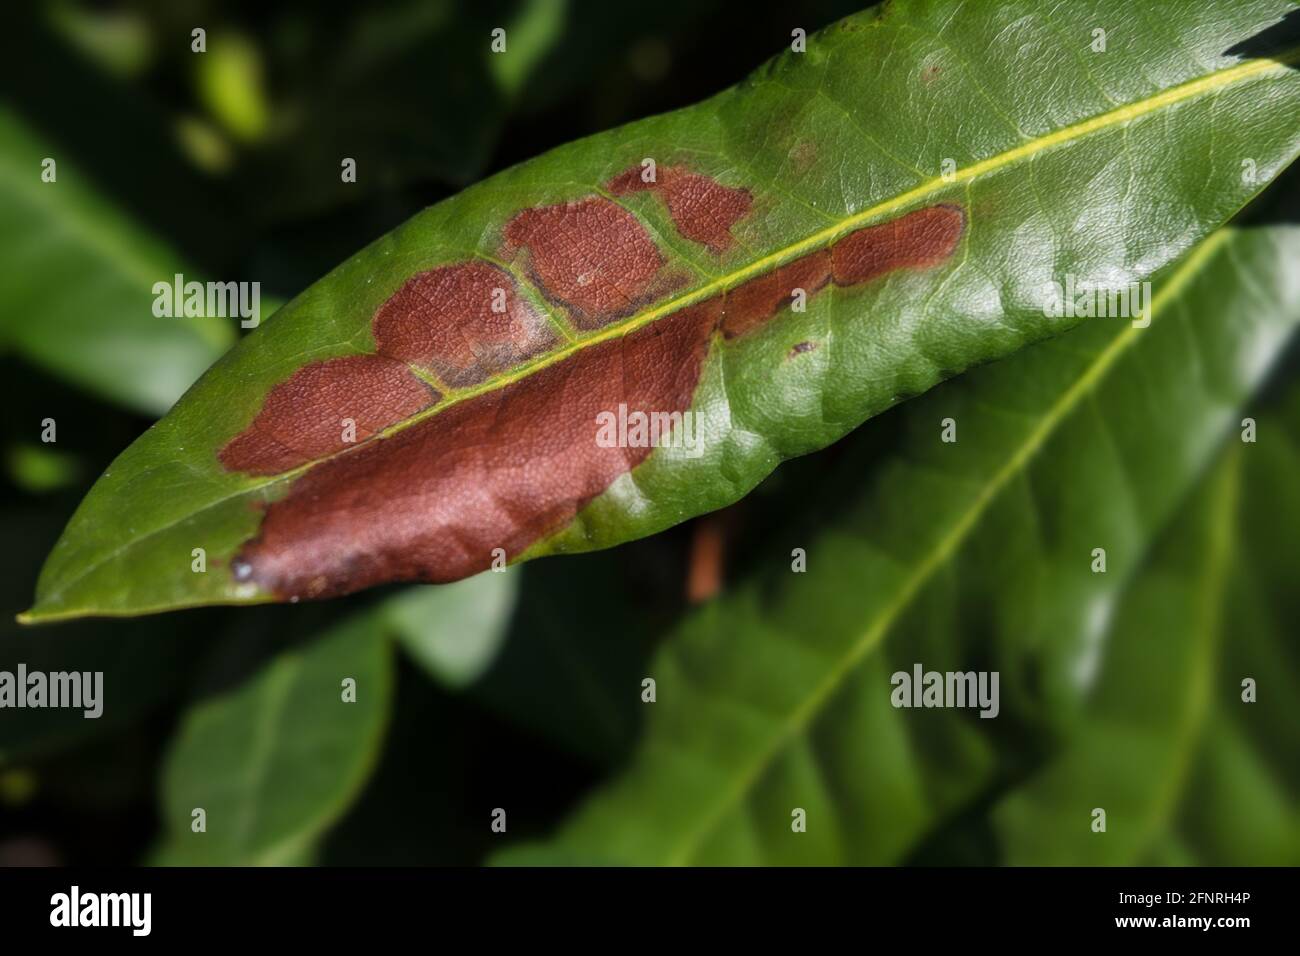 Close-up of a leaf of rhododendron with brown spots caused by fungal diseases Stock Photo